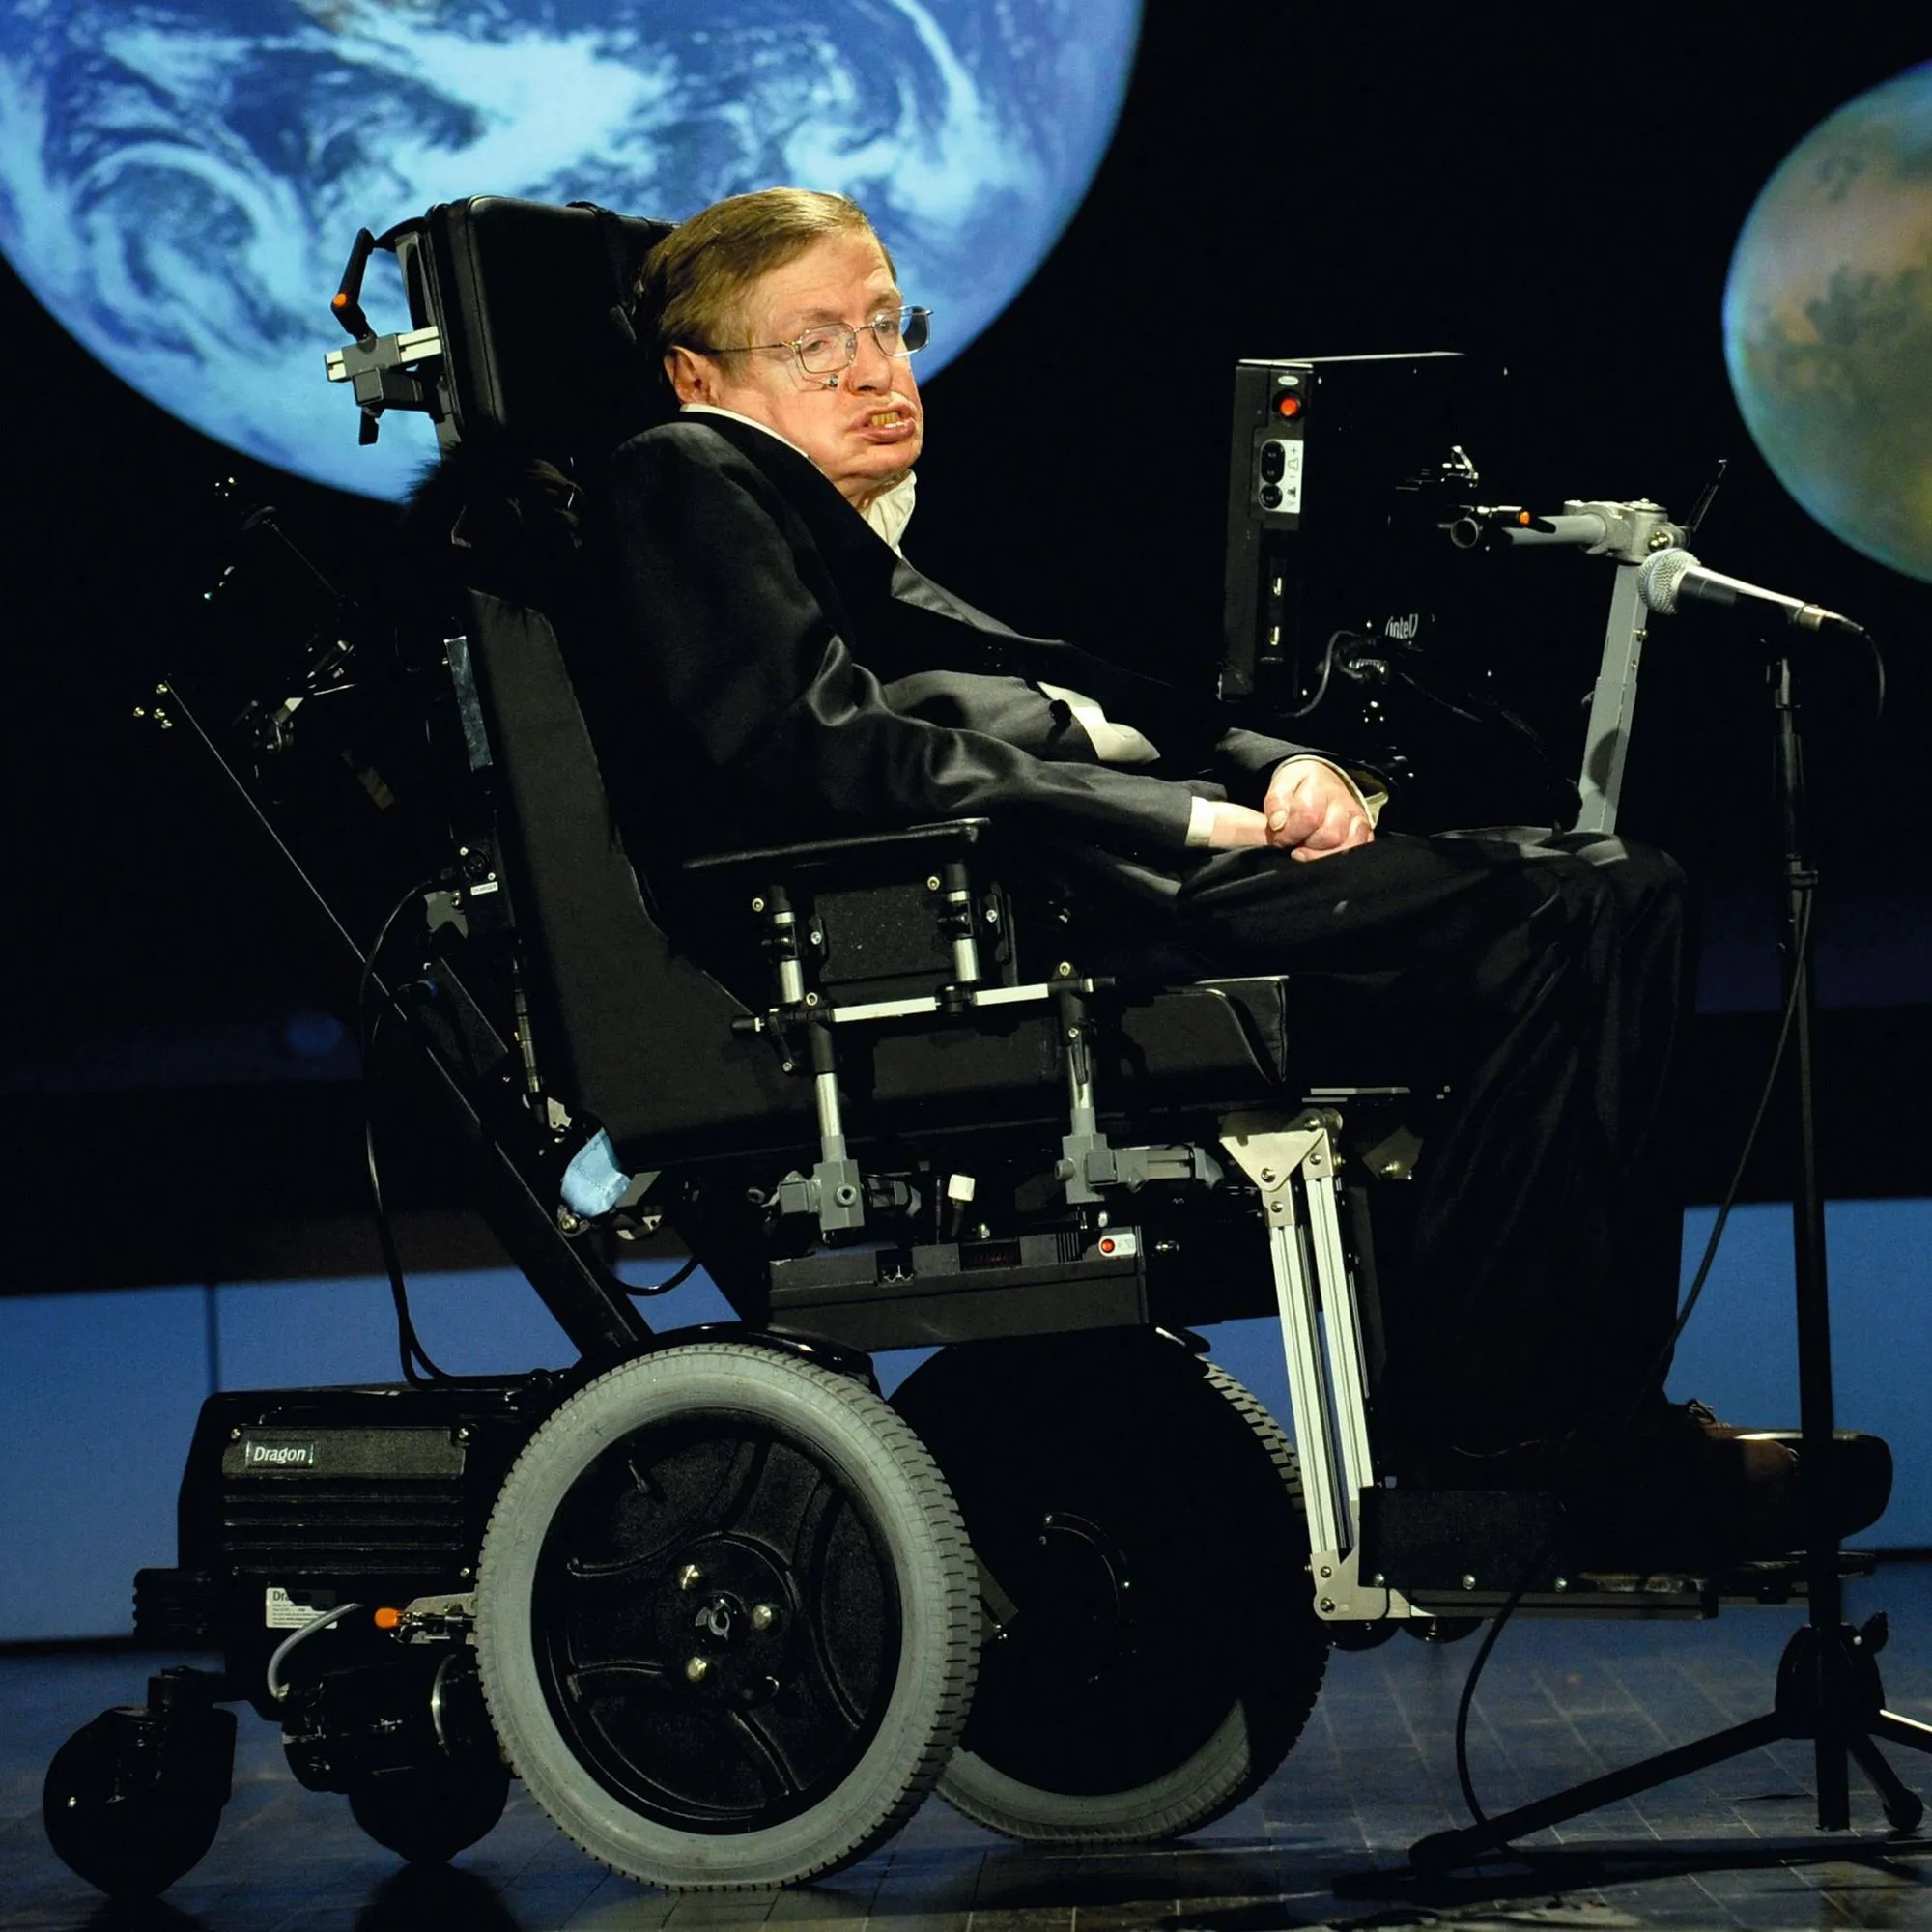 Stephen Hawking giving a lecture for NASA's 50th anniversary, 2008.